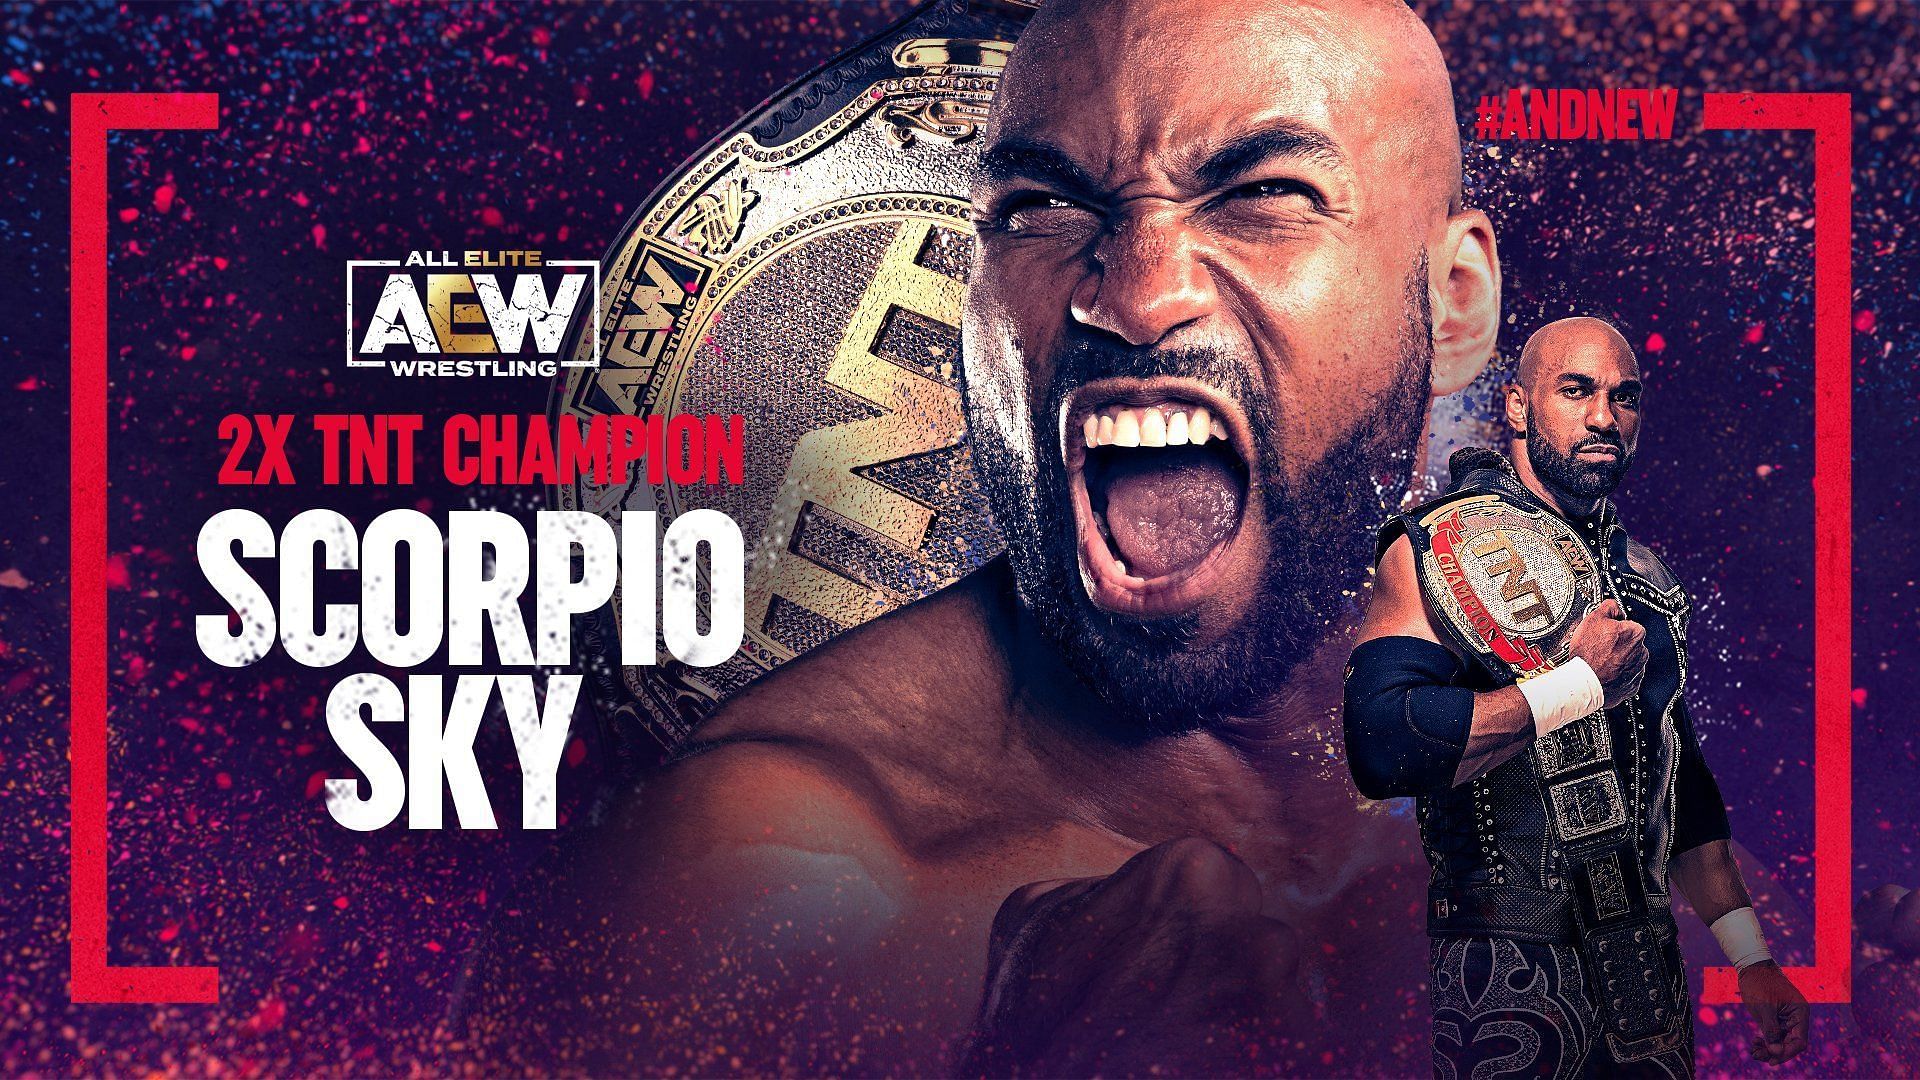 Scorpio Sky became a two-time TNT Champion